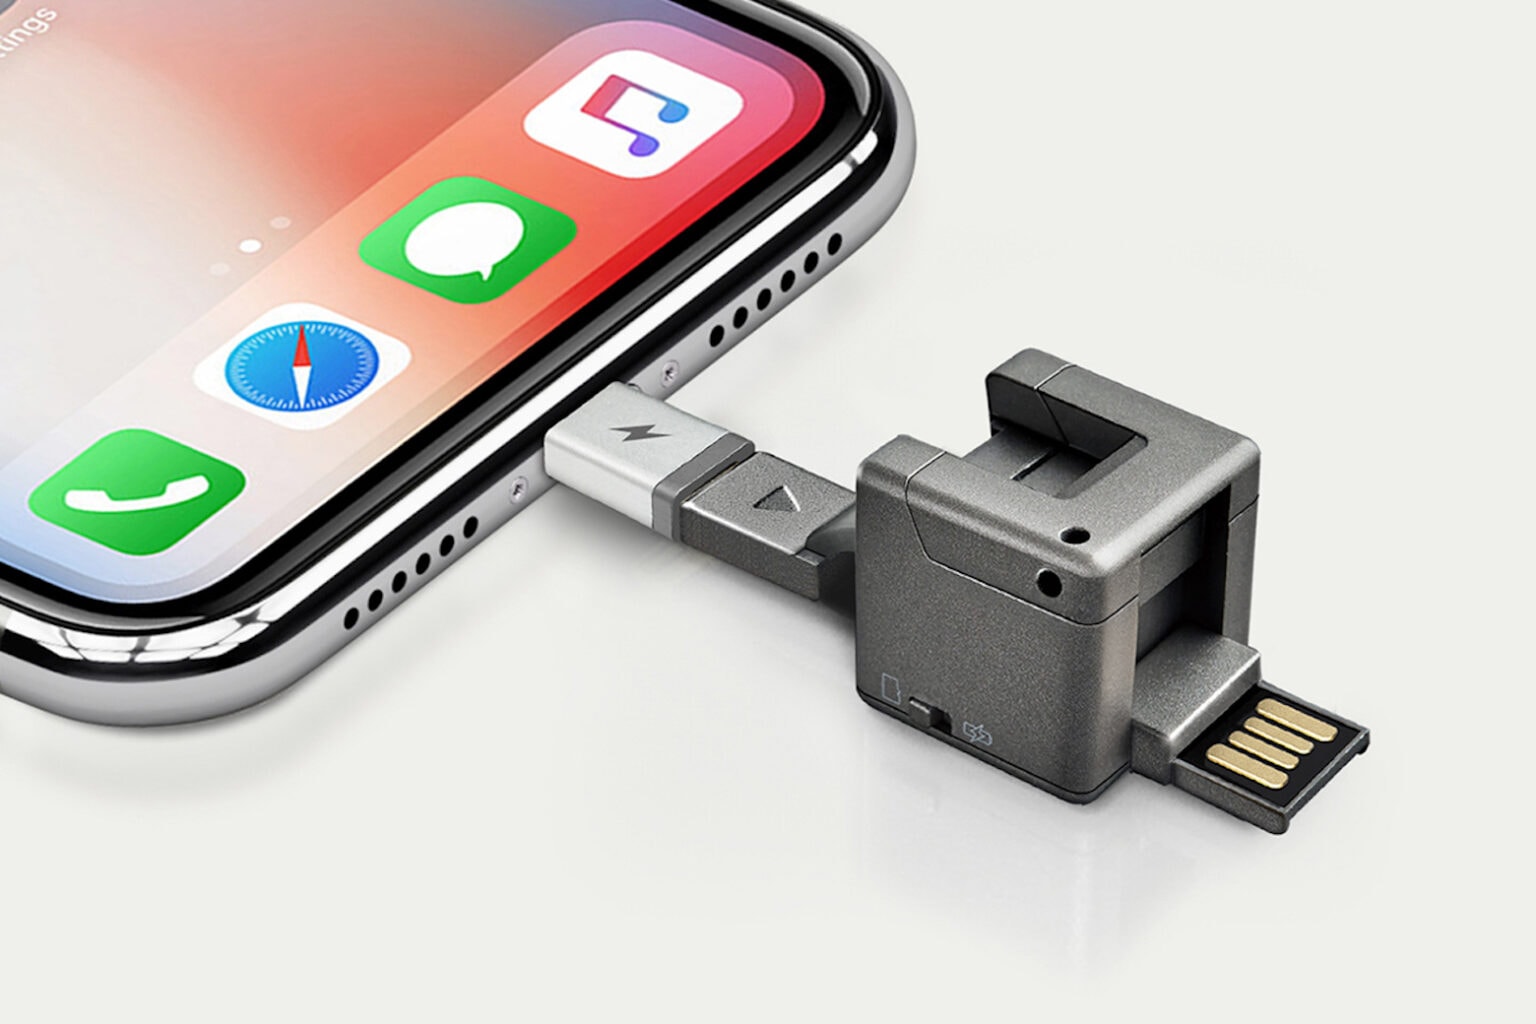 This all-in-one phone keyring features a charger, USB, stand and more.